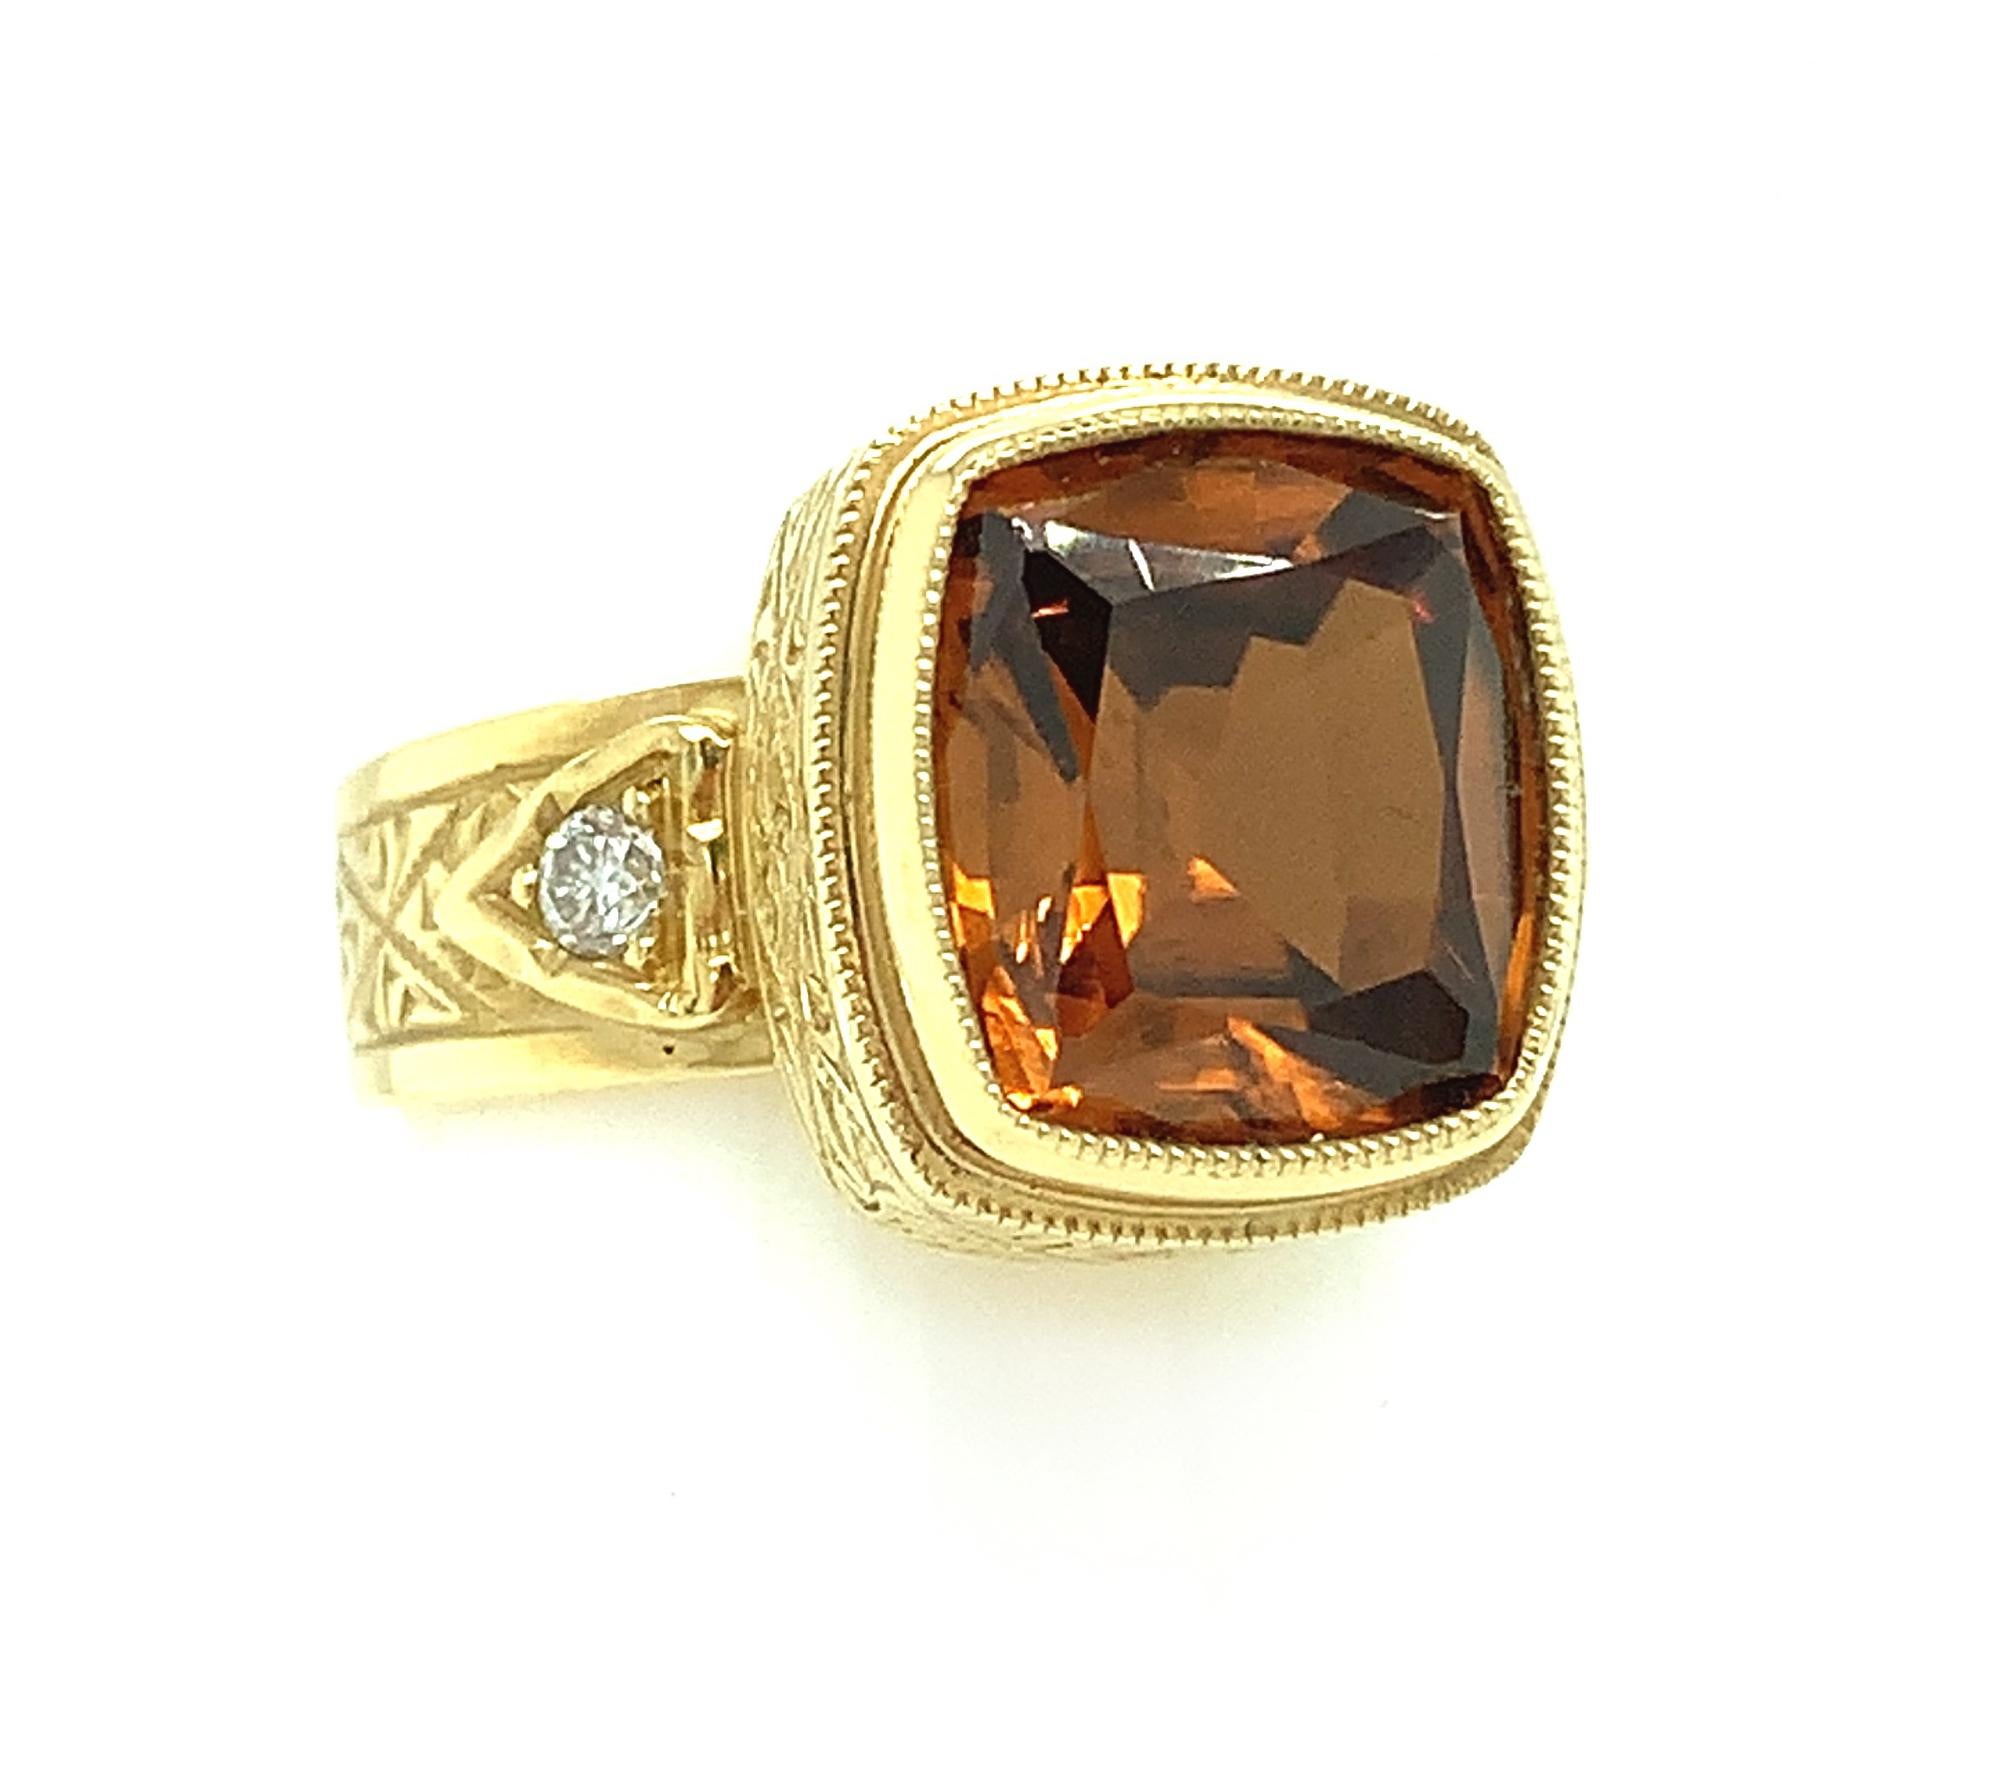 Artisan 5.73 ct. Orange Zircon and Diamond Band Ring in 18k Yellow Gold For Sale